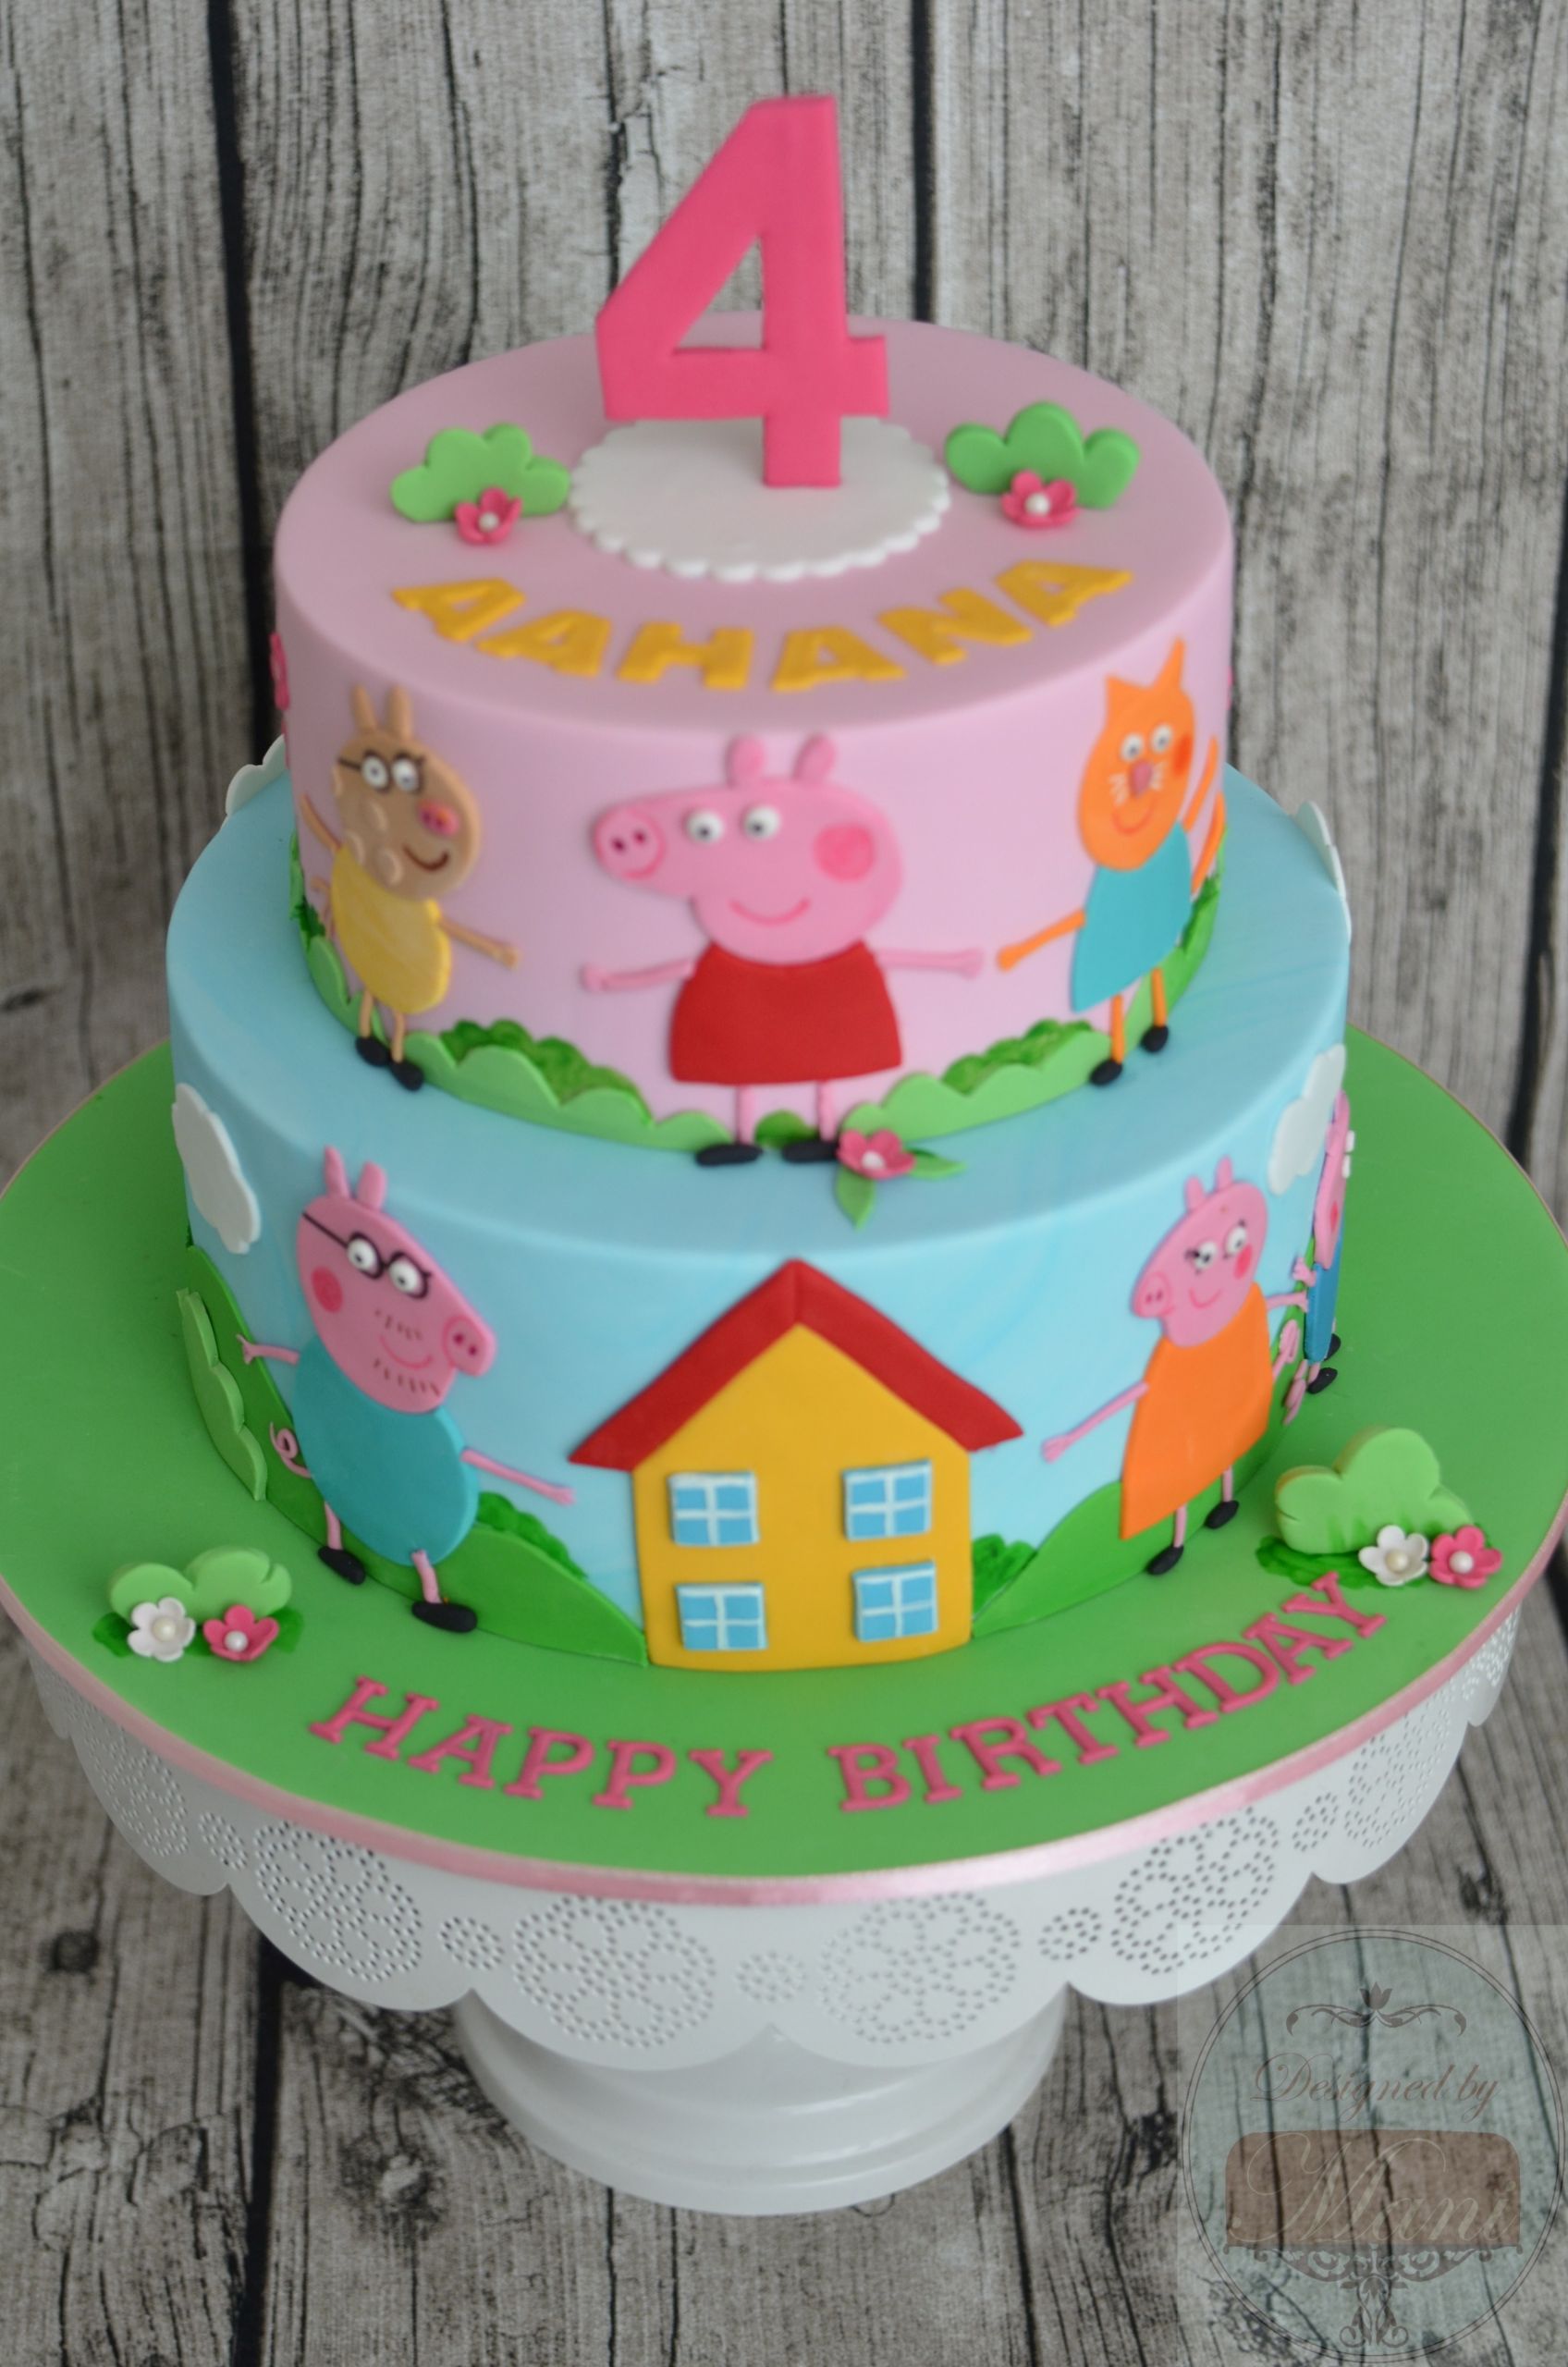 Peppa Pig Birthday Cakes
 "peppa Pig & Friends" CakeCentral